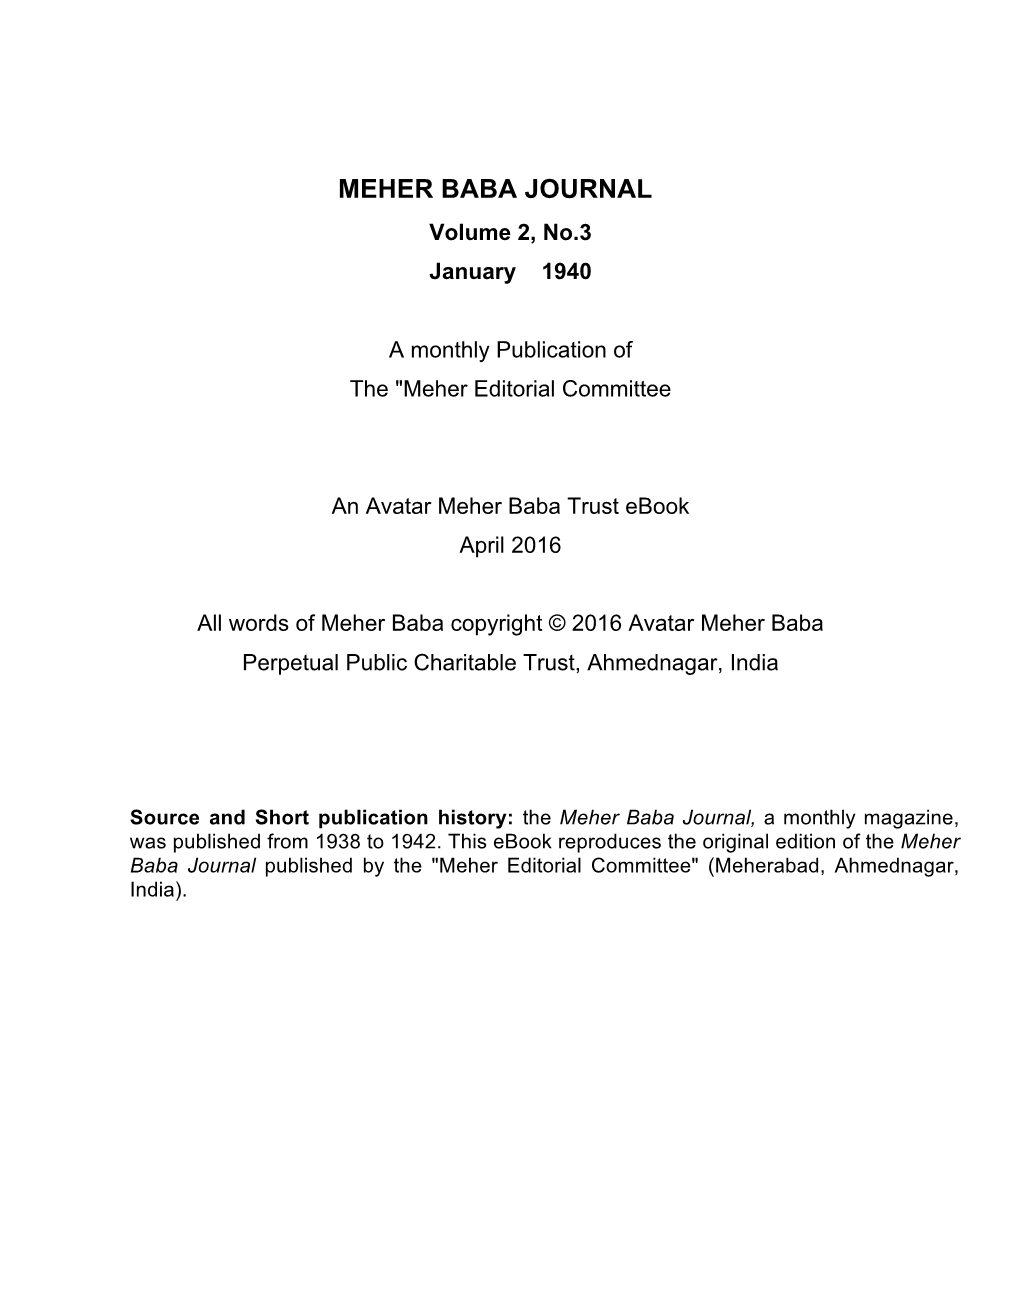 Meher Baba Journal, Vol. 2, No. 3